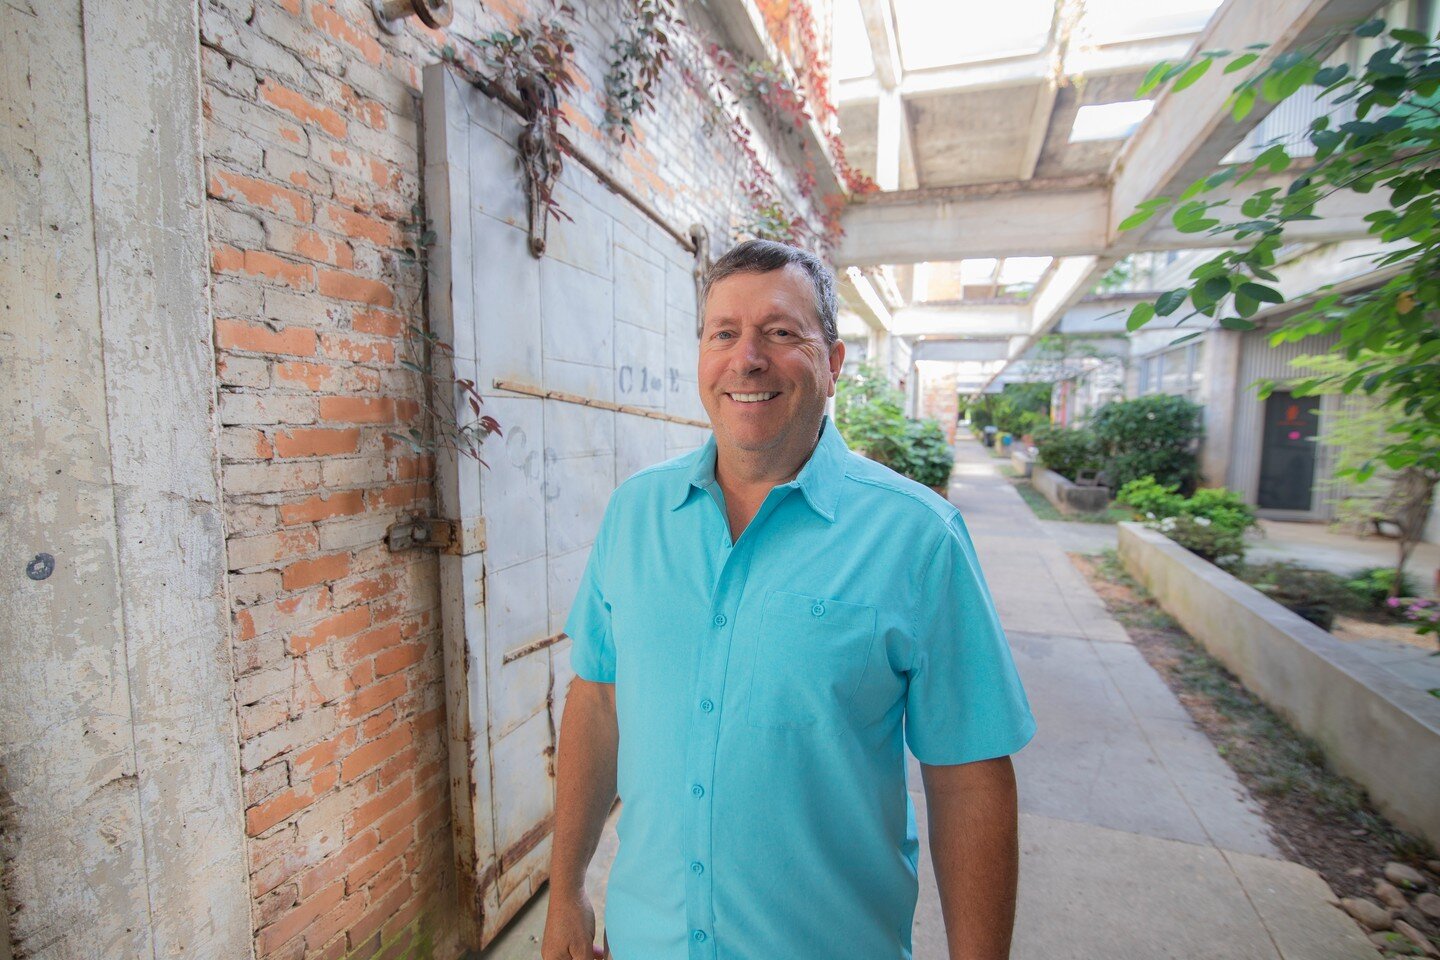 ❇️ Meet Bruce Harris of Terra Alma ❇️

Since 1973, there has never been a plot of land Bruce didn&rsquo;t have a plan for. 

From construction of Olympic Towers in New York City to transformations of former country clubs to ice skating rinks, Bruce&r